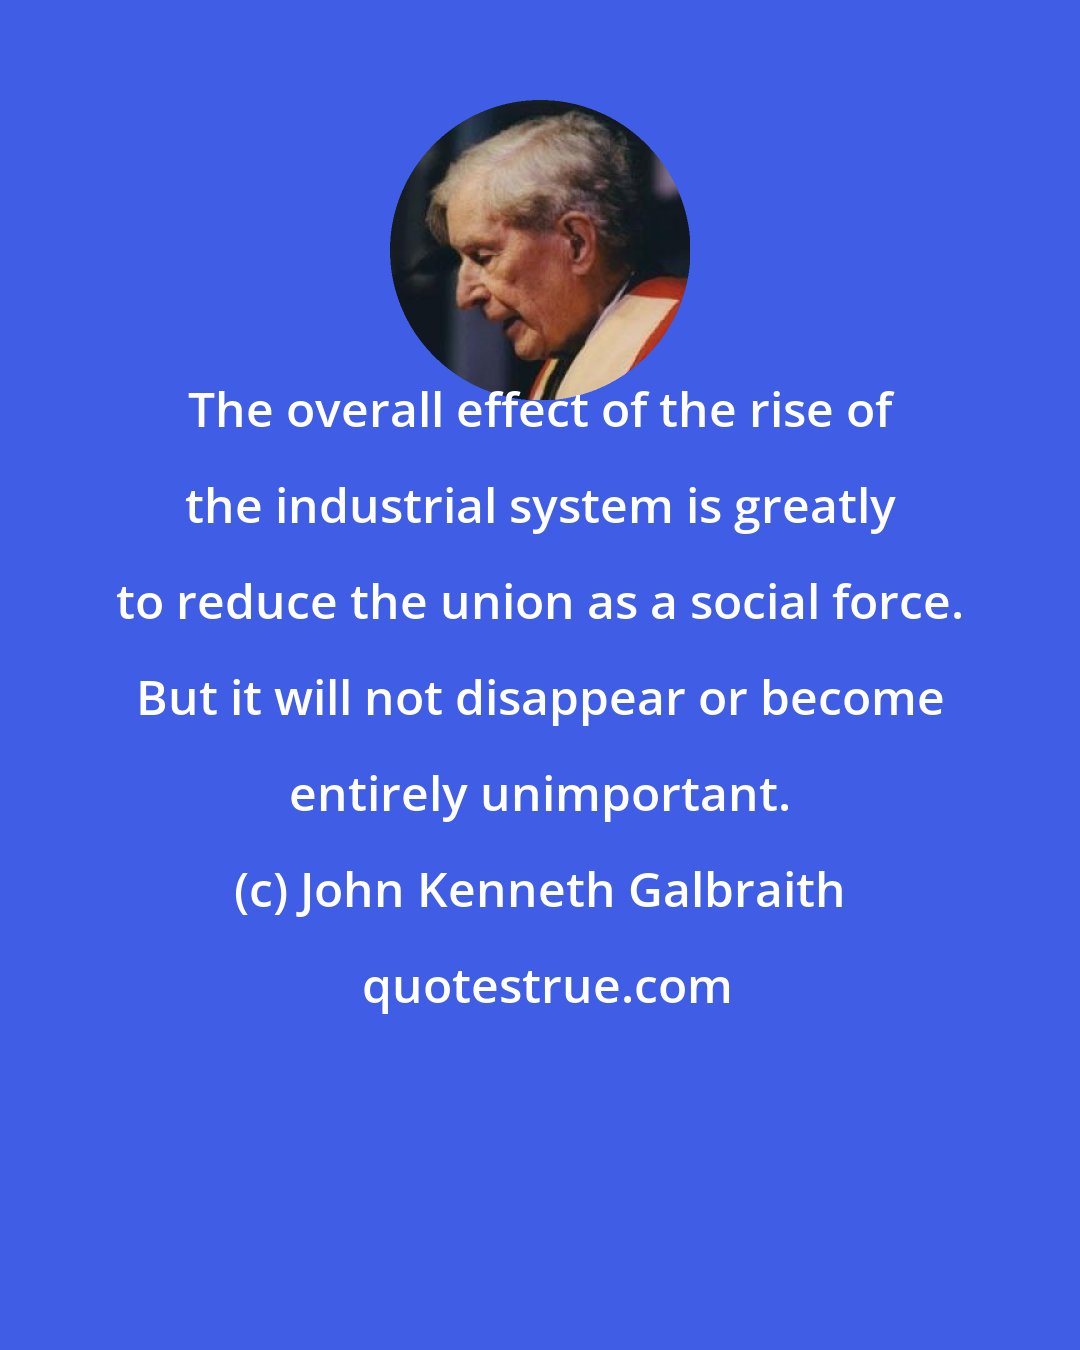 John Kenneth Galbraith: The overall effect of the rise of the industrial system is greatly to reduce the union as a social force. But it will not disappear or become entirely unimportant.